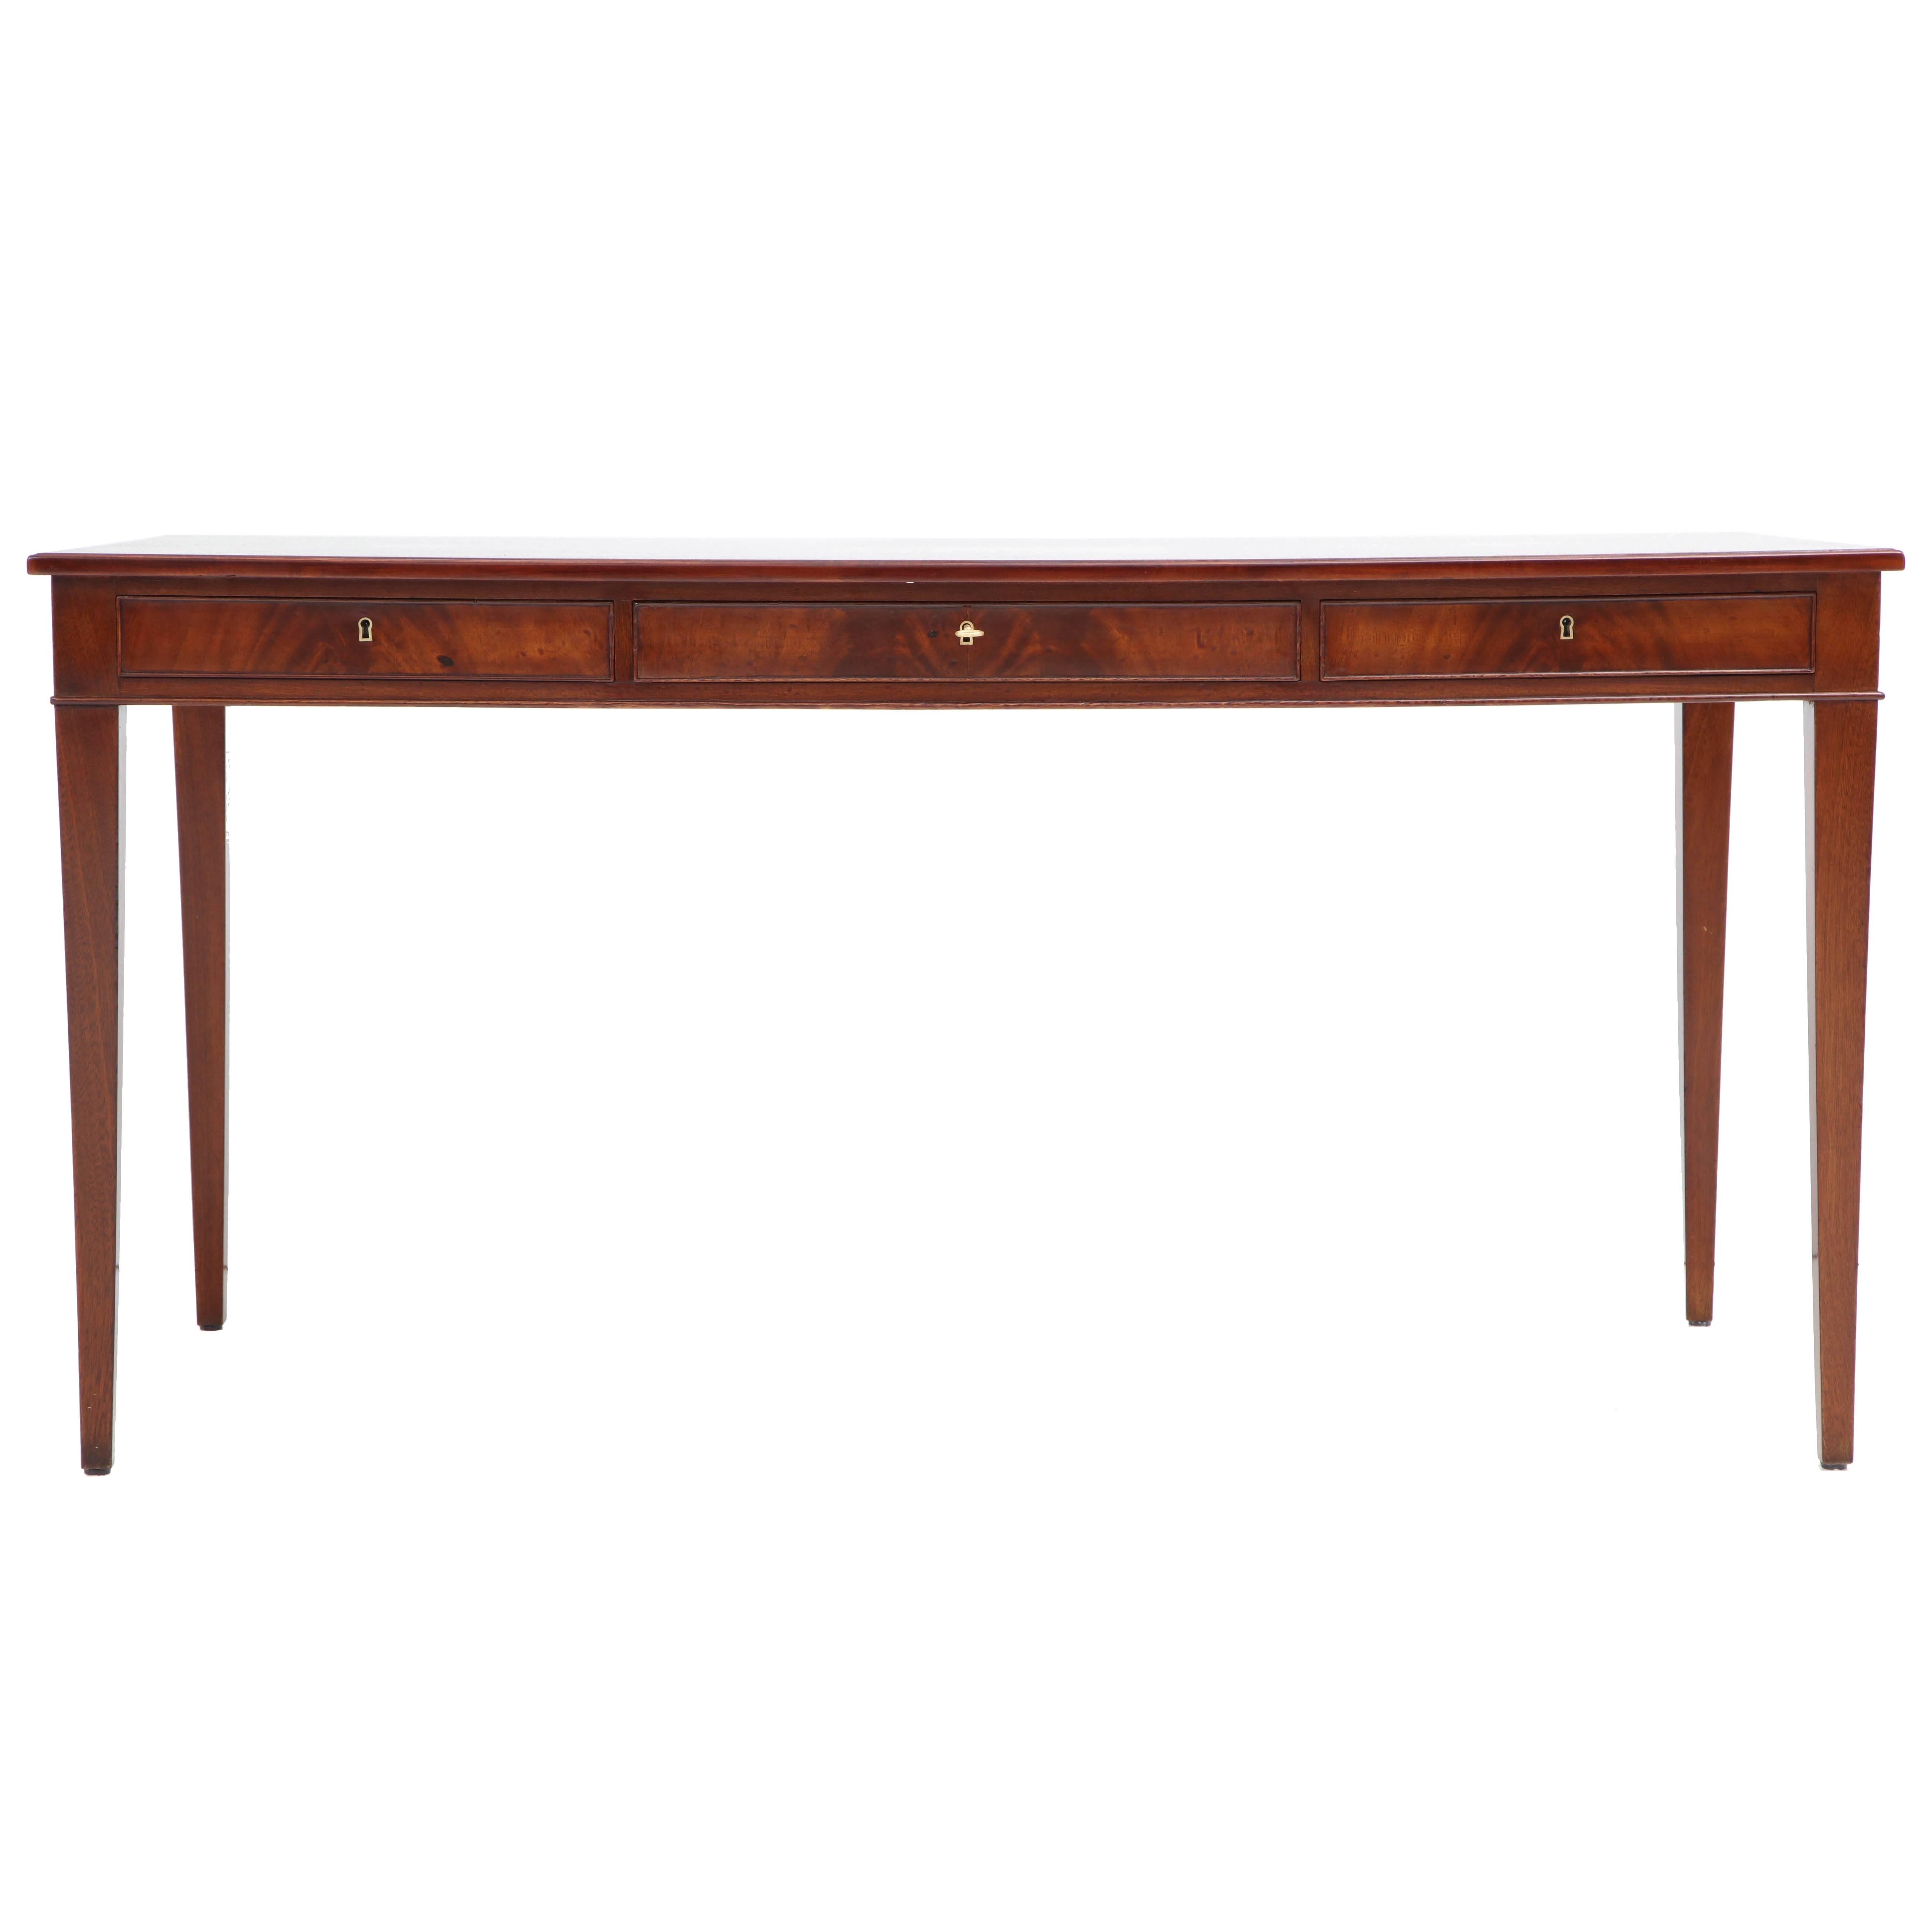 A Danish mahogany writing table by Frits Henningsen, furniture designer and cabinet maker (1889-1965). This desk is a classic example of Henningsen's elegant clean lines and use of quality woods with perfect balanced craftsmanship. A rectangular top